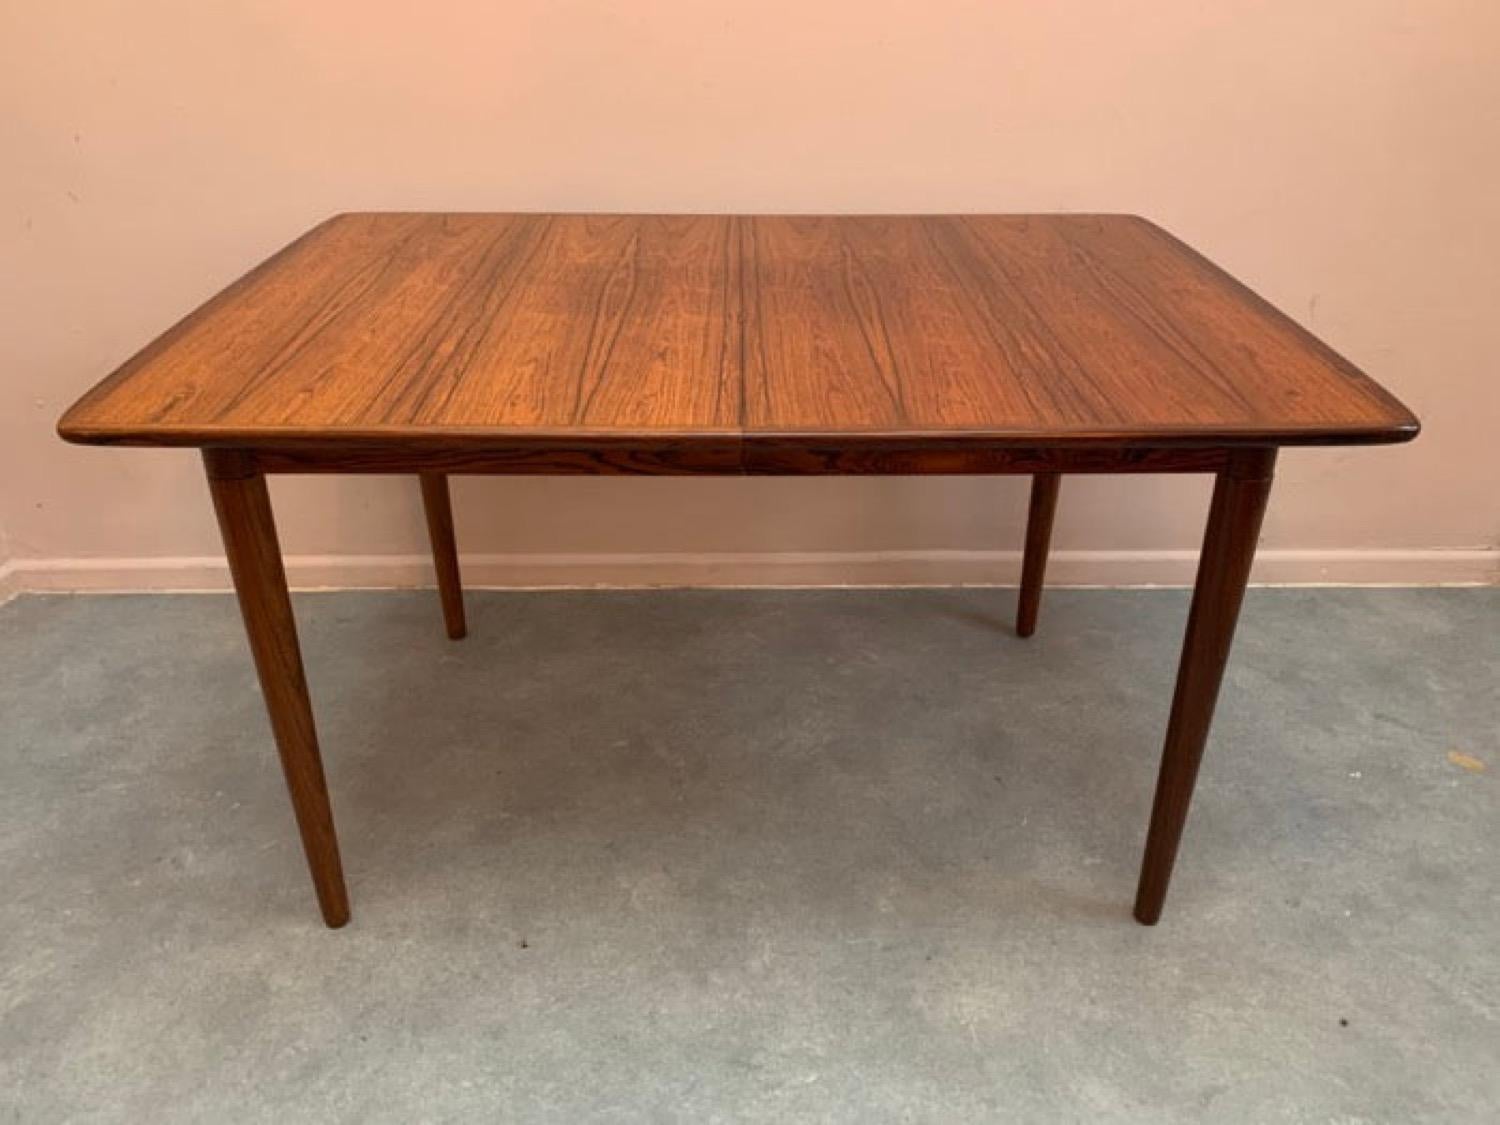 A stunning 1960s Norwegian rosewood dining table designed by Rolf Rastad & Adolf Relling and manufactured by Gustav Bahus. Model no 14. In very good condition with a beautiful deep patina and grain with some minor sun fading. The table is a compact